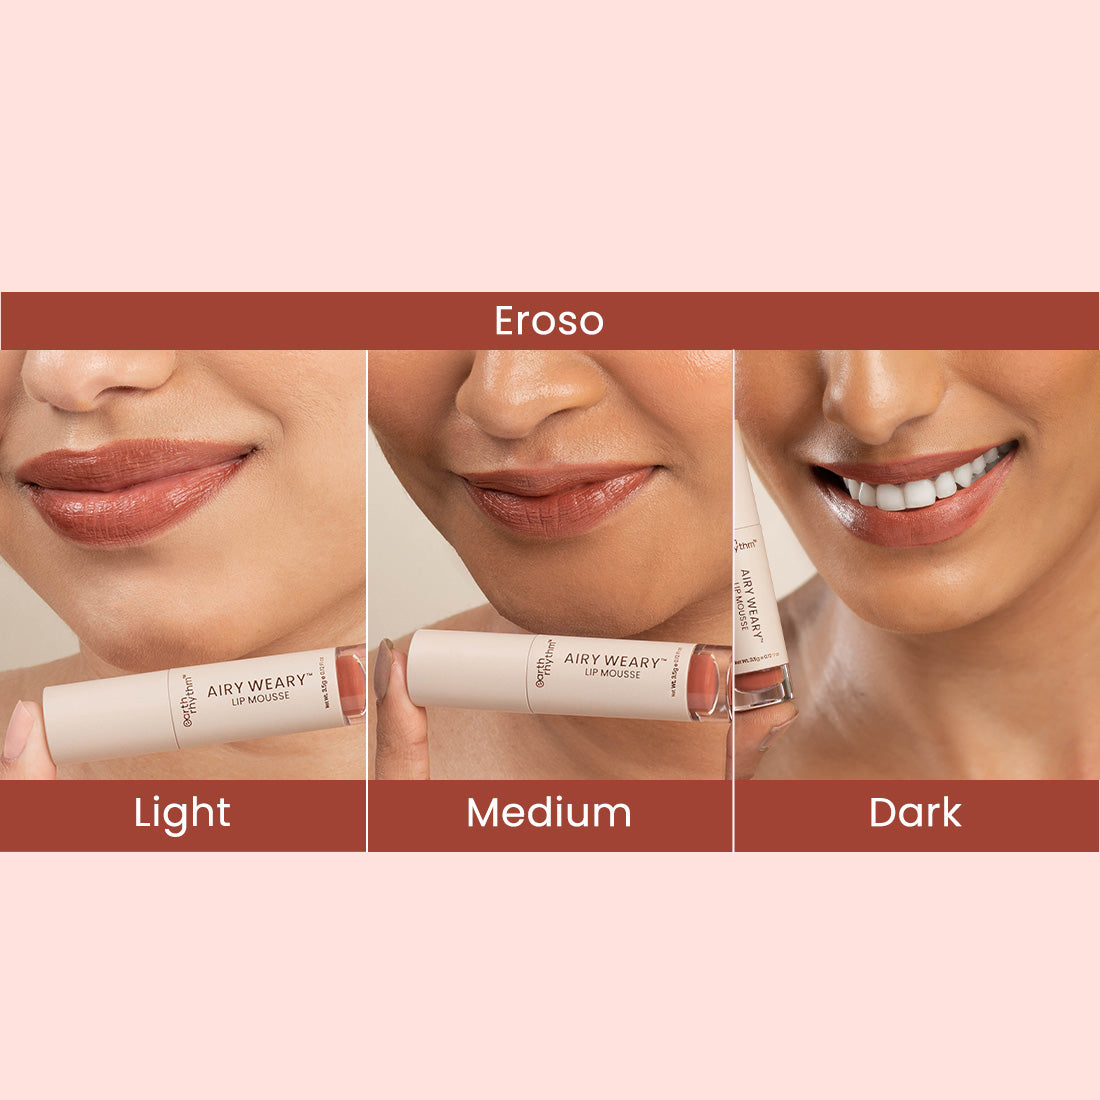 AIRY WEARY LIP MOUSSE TINT (EROSO)